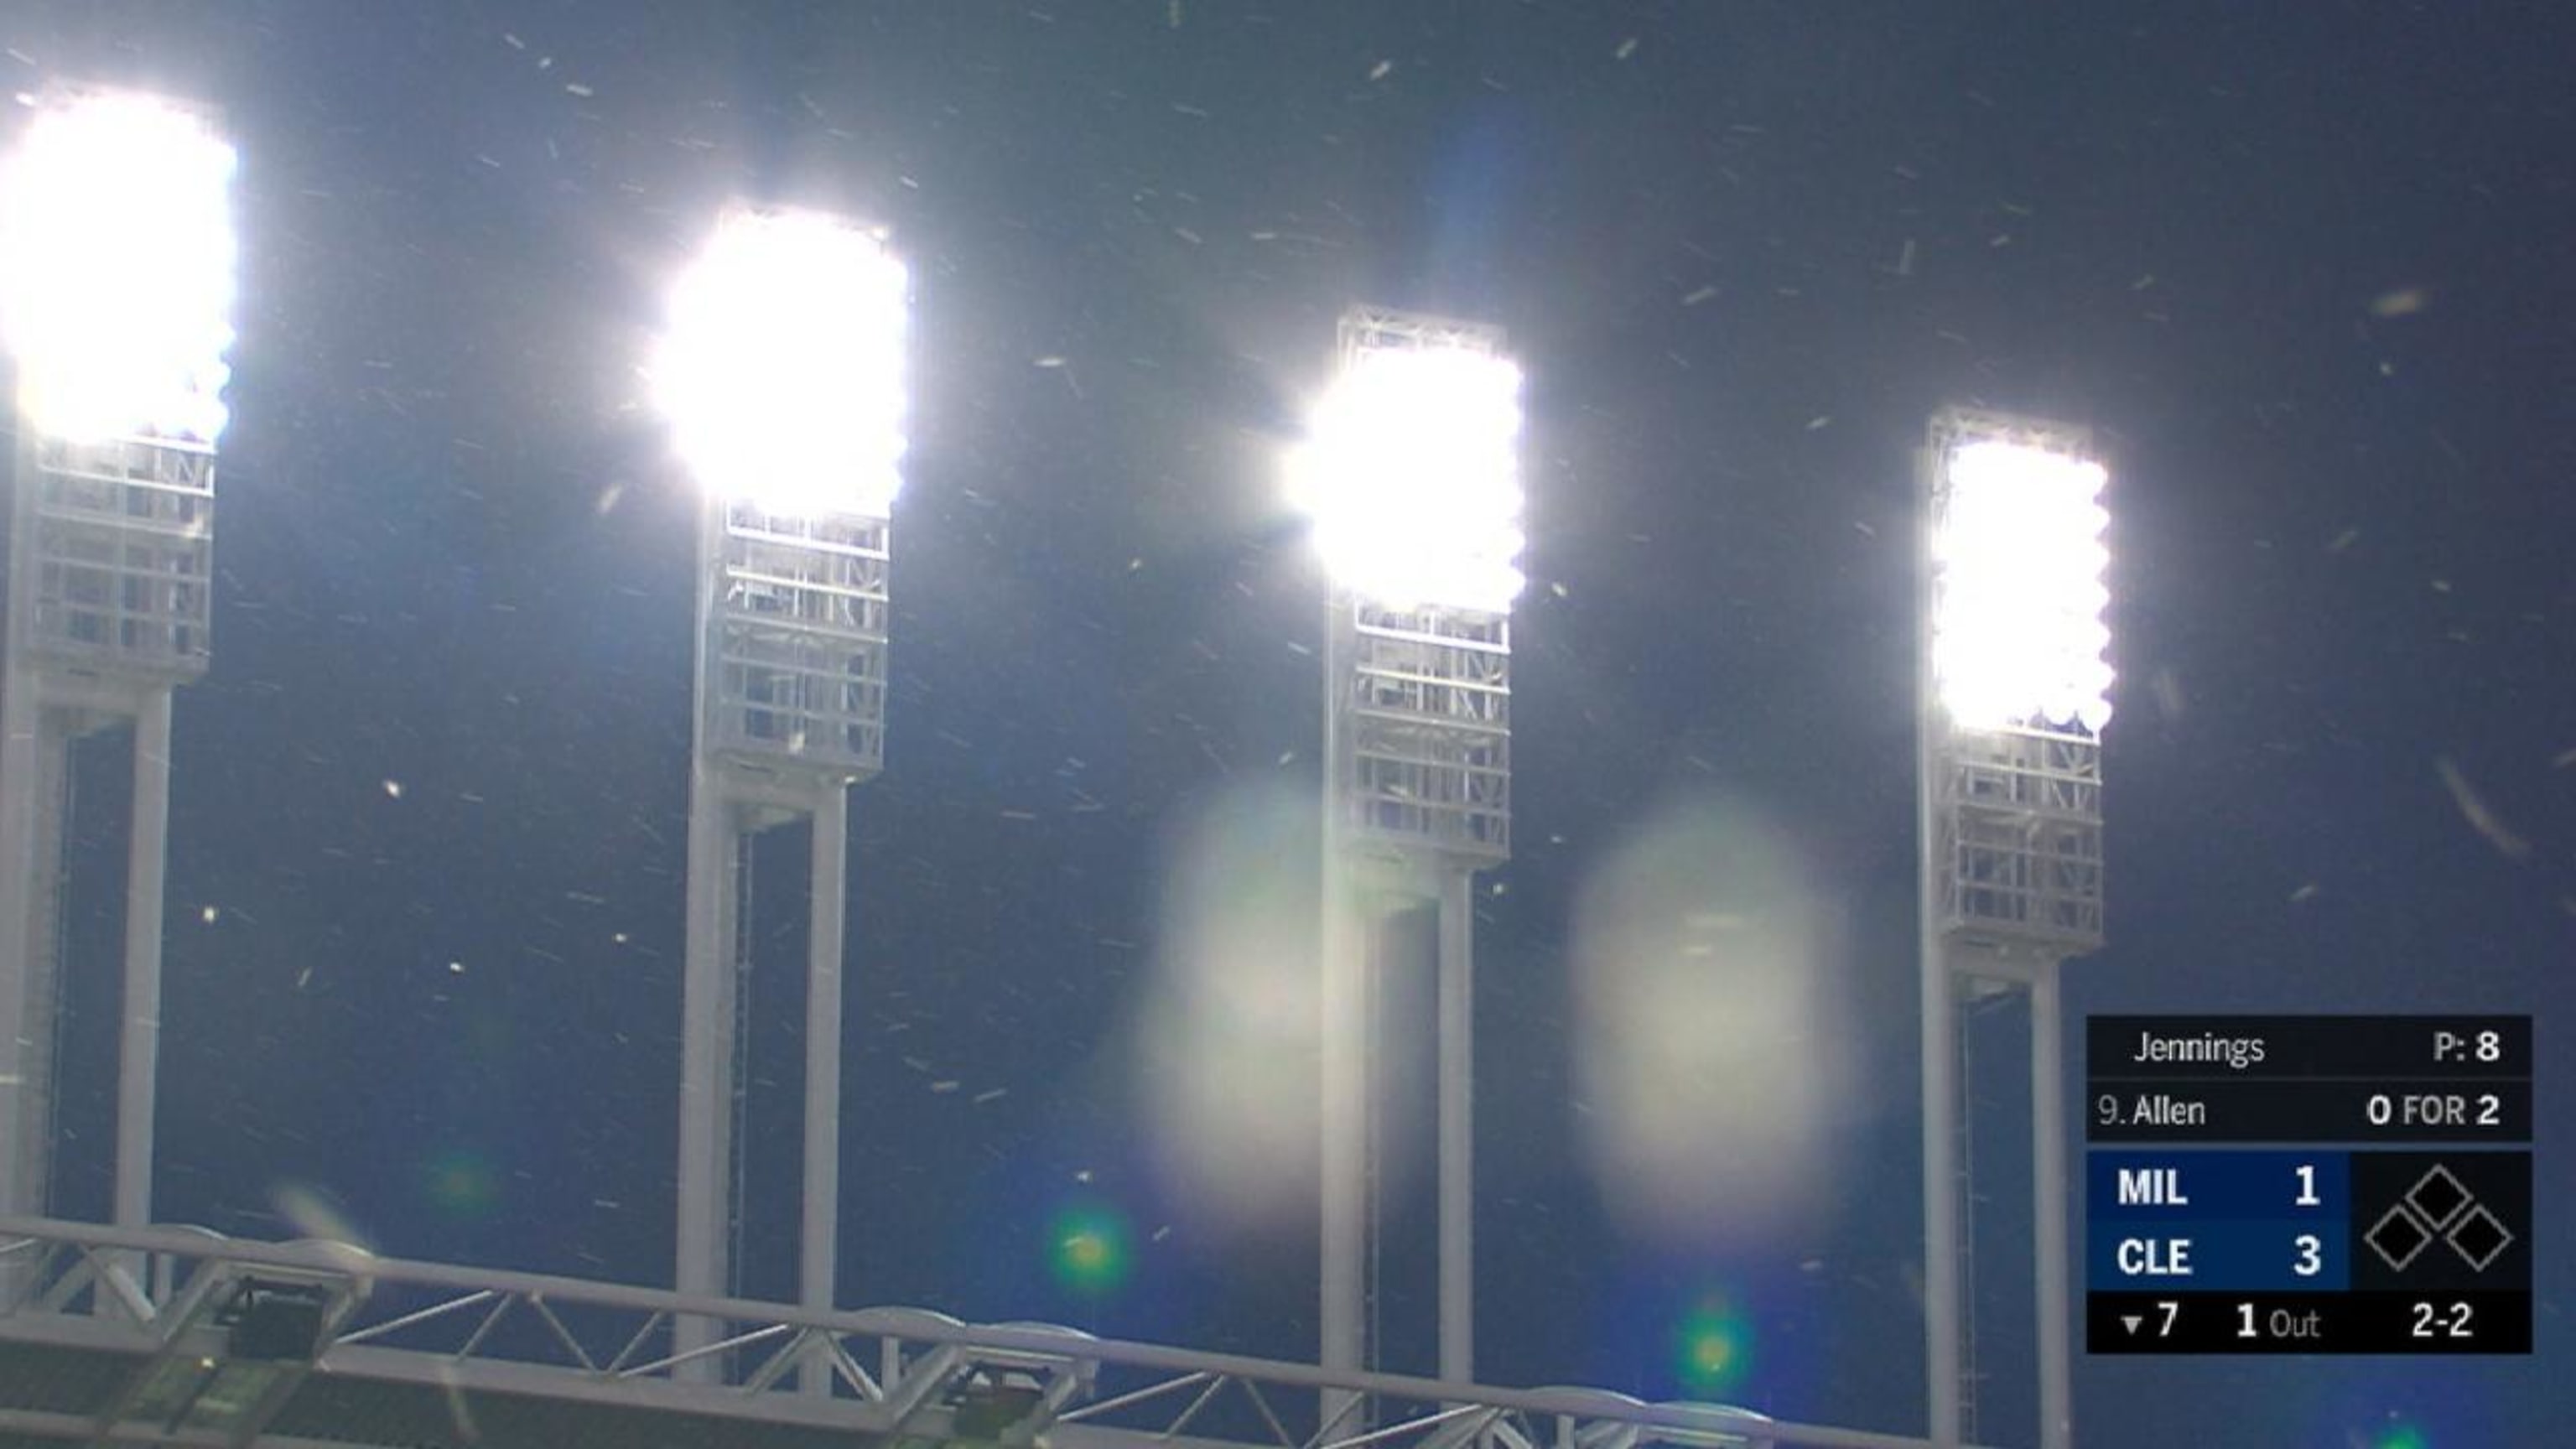 The midges have returned to Progressive Field, and please don't